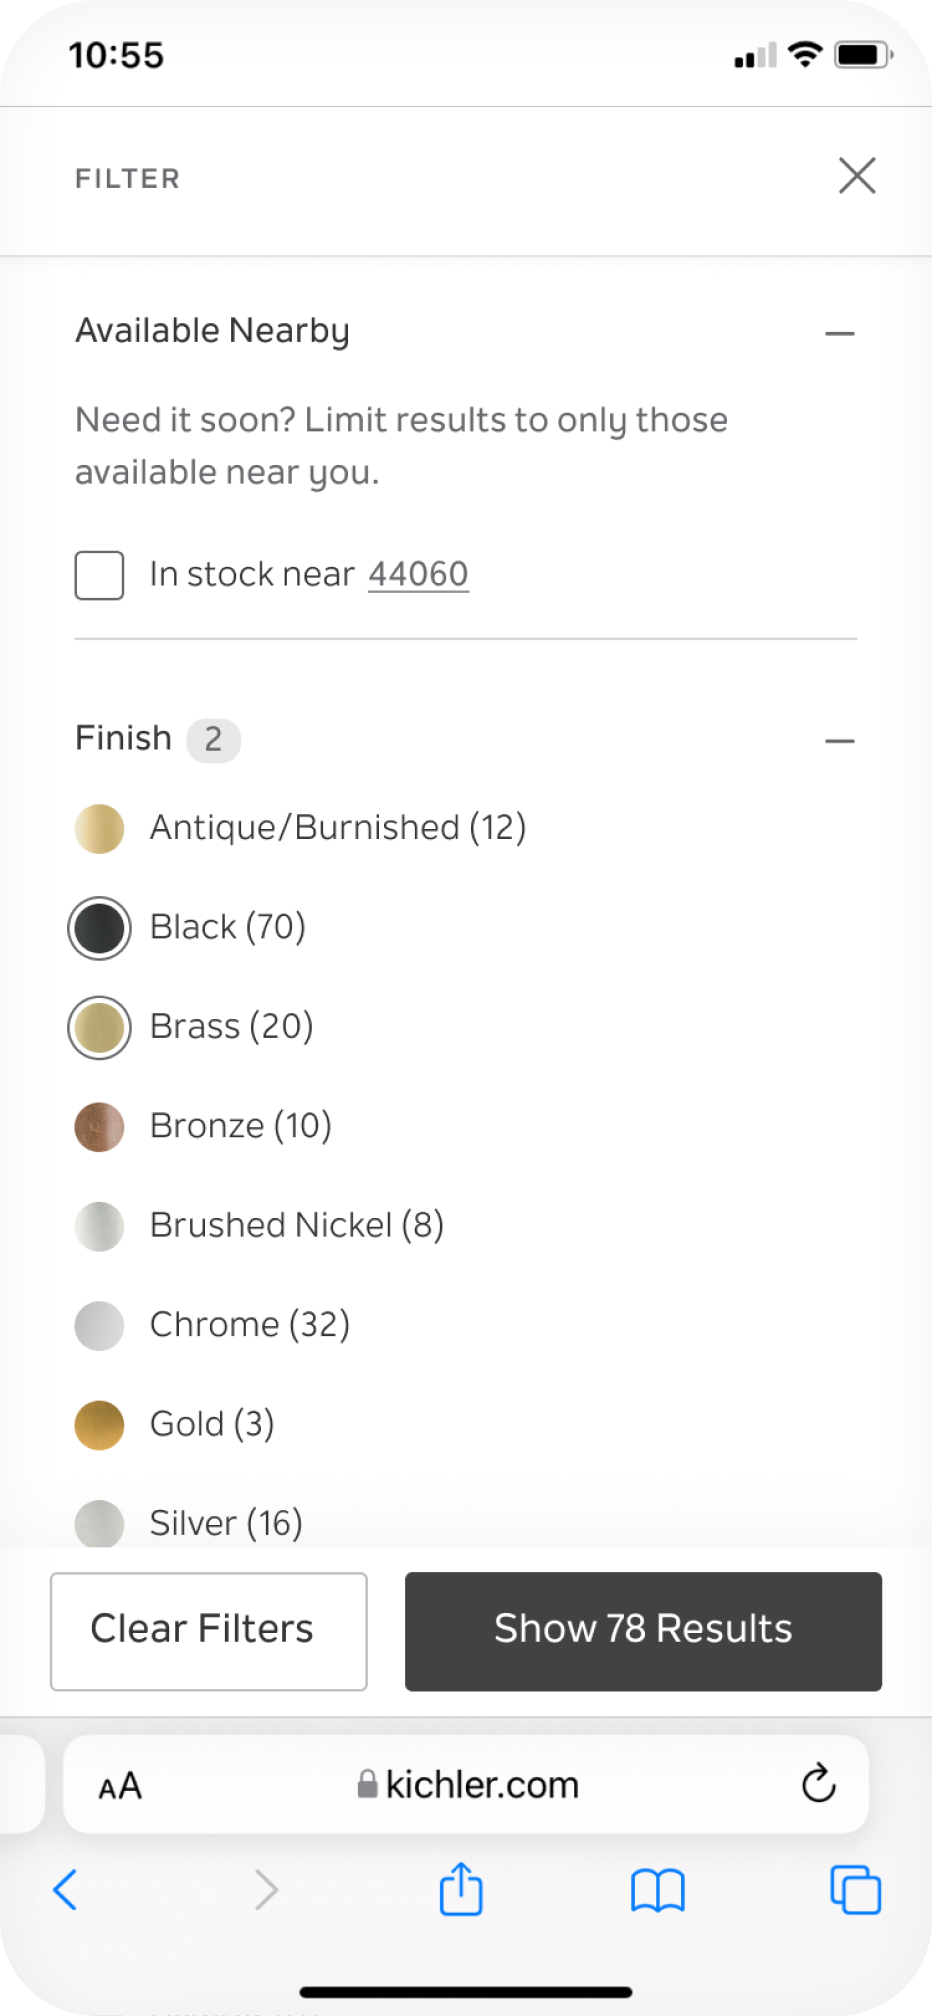 product filters with the "Finish" options exposed